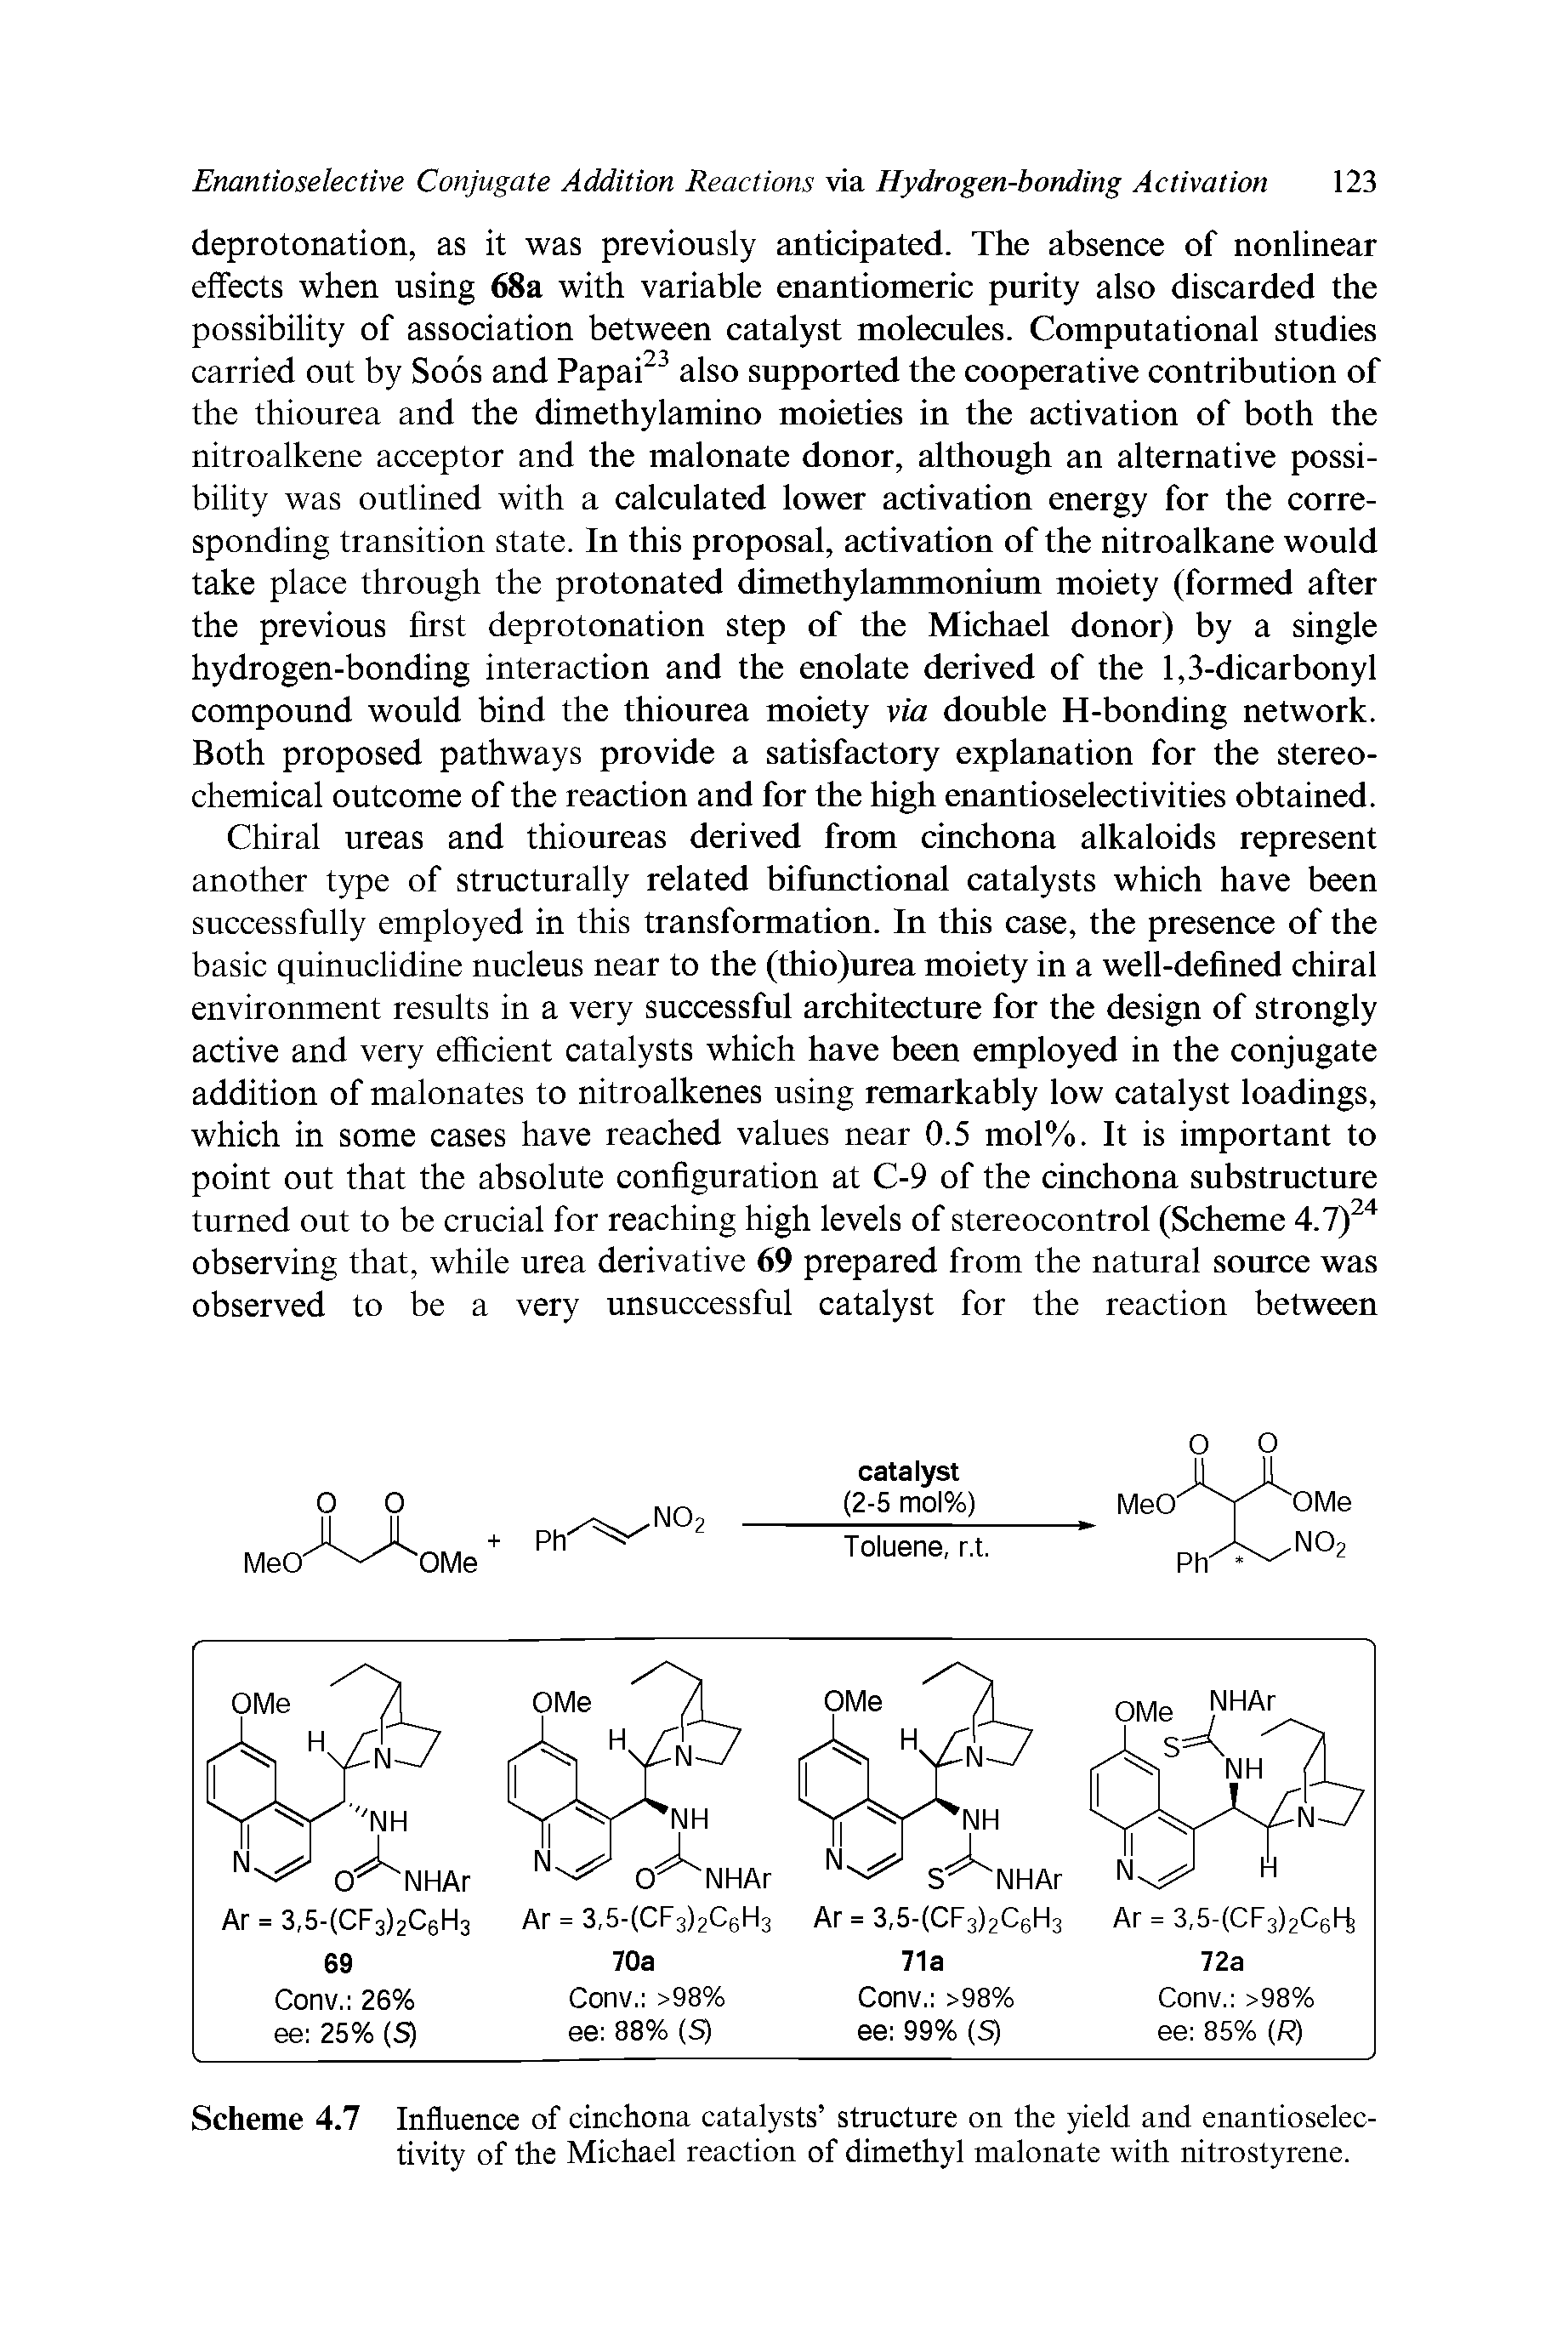 Scheme 4.7 Influence of cinchona catalysts structure on the yield and enantioselec-tivity of the Michael reaction of dimethyl malonate with nitrostyrene.